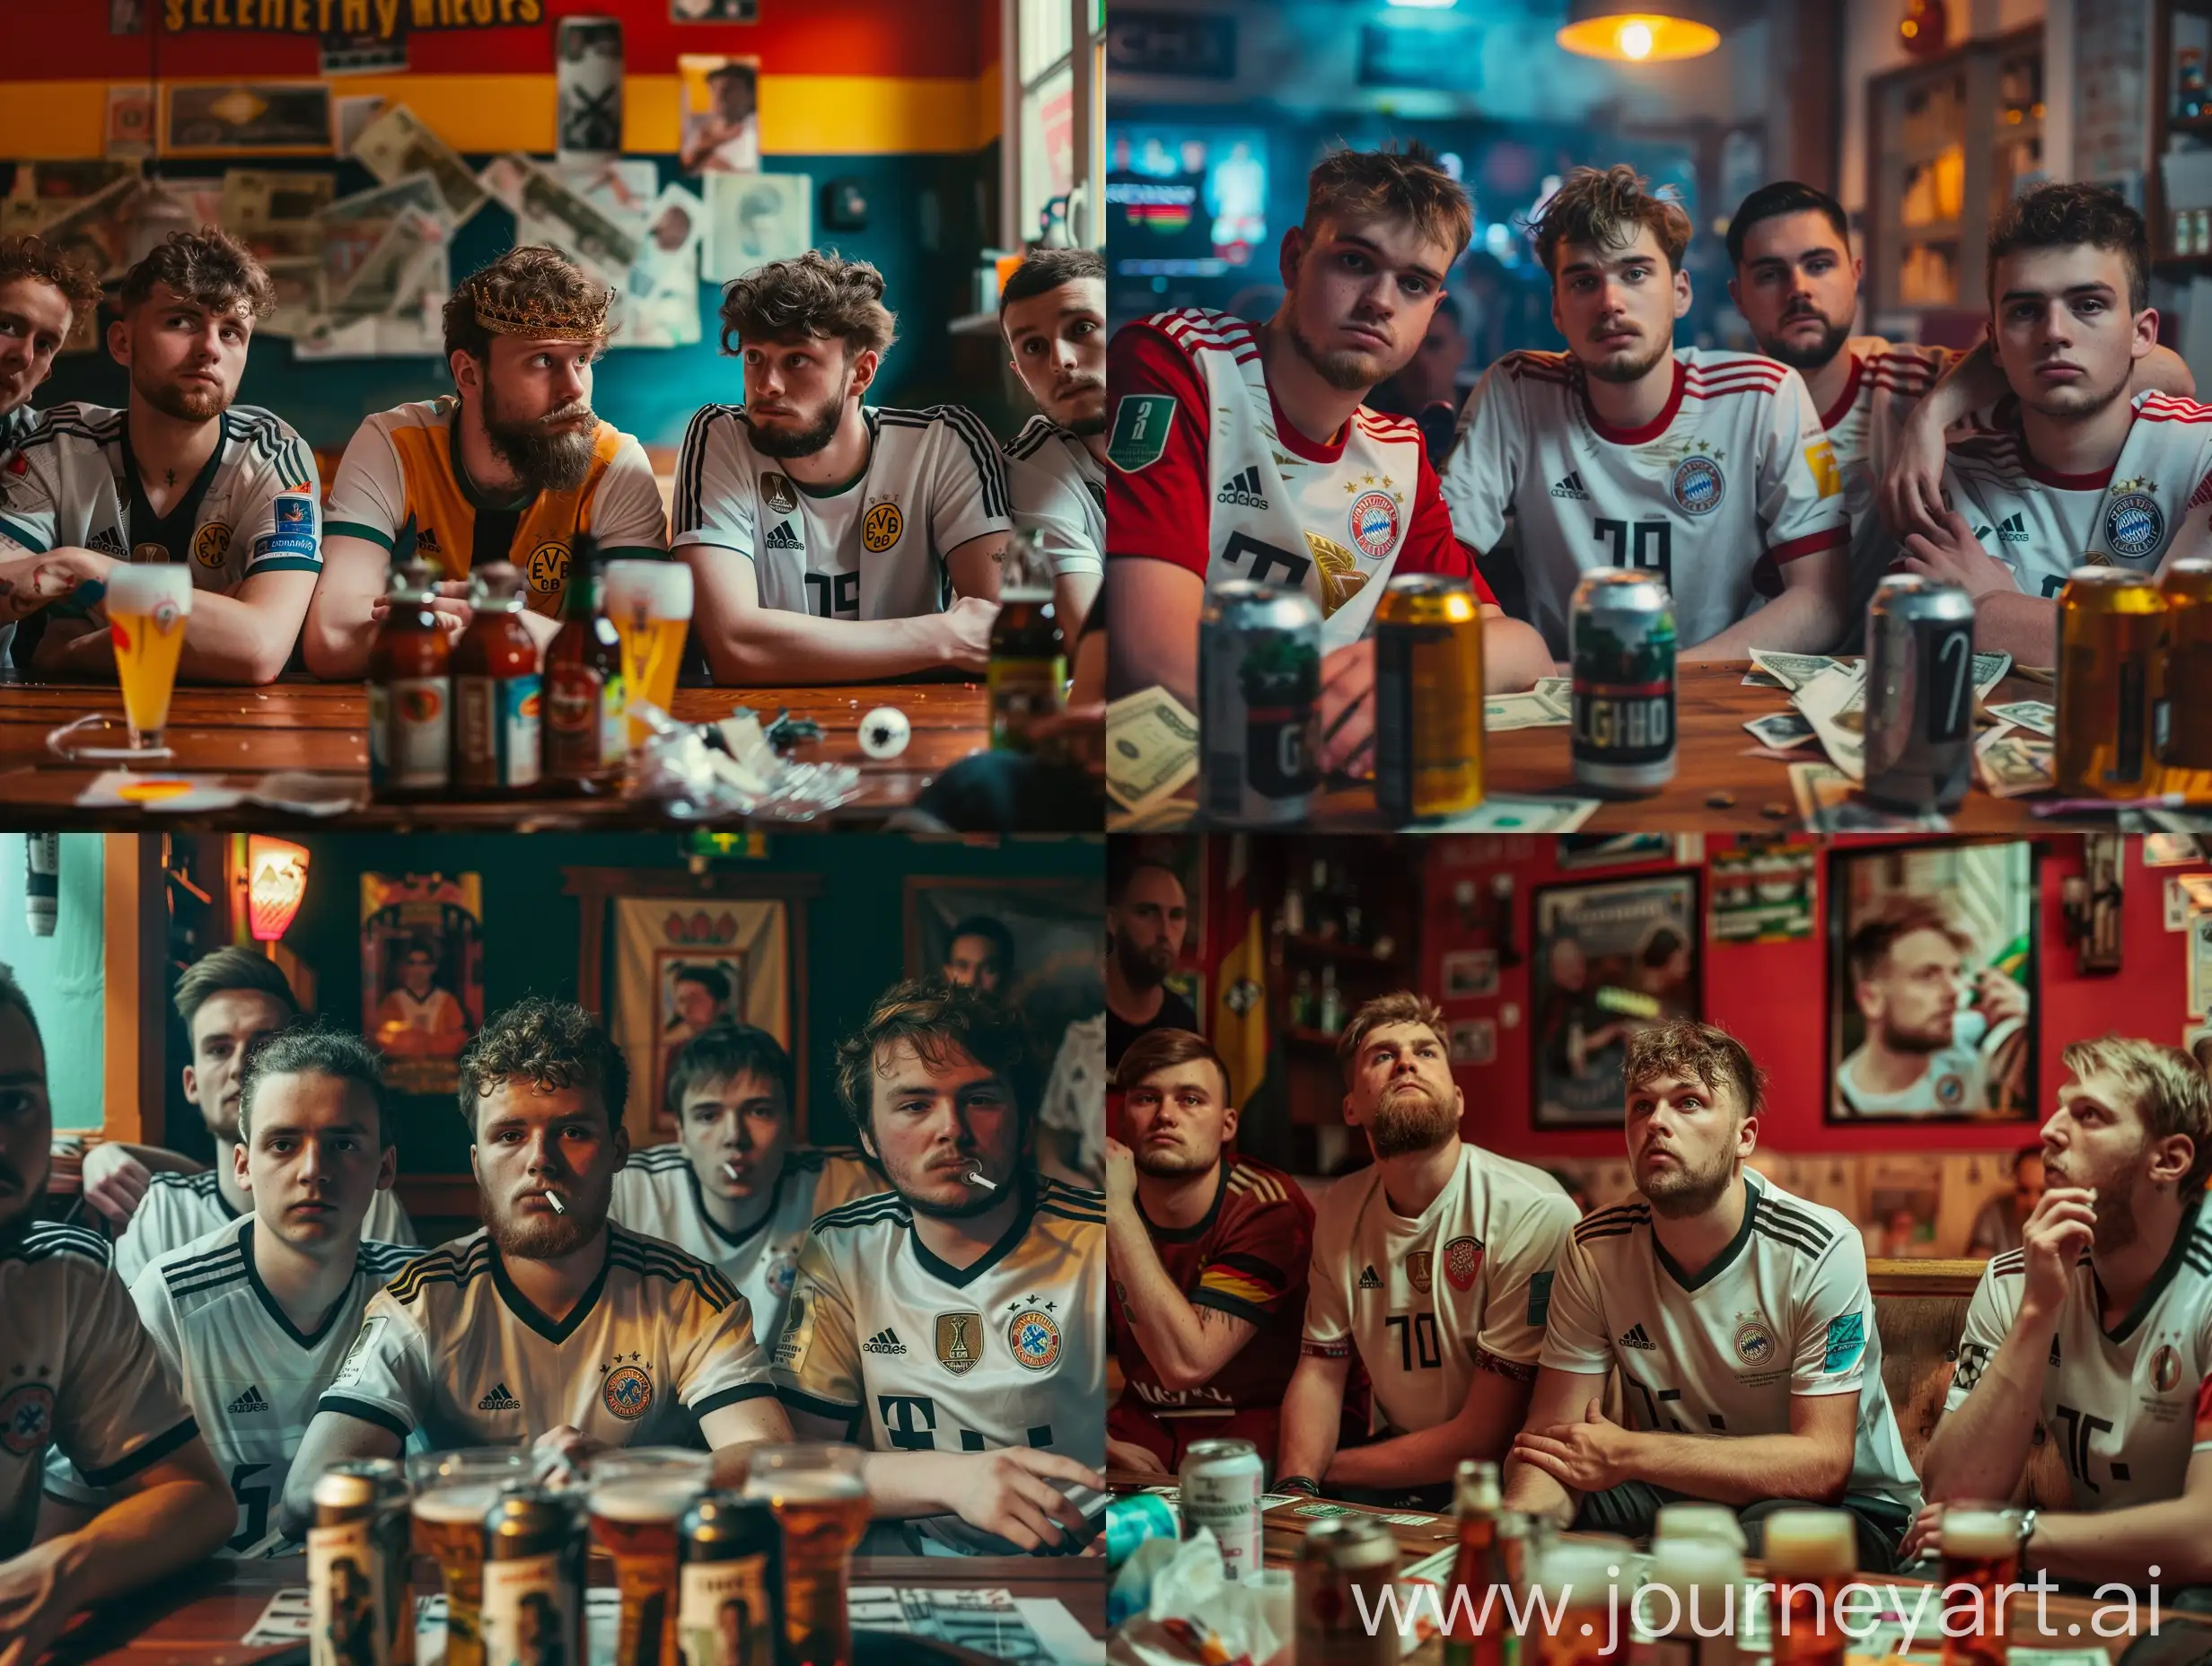 Group-of-Young-Men-in-Germany-Jerseys-Watching-Euro-Cup-Match-in-Pub